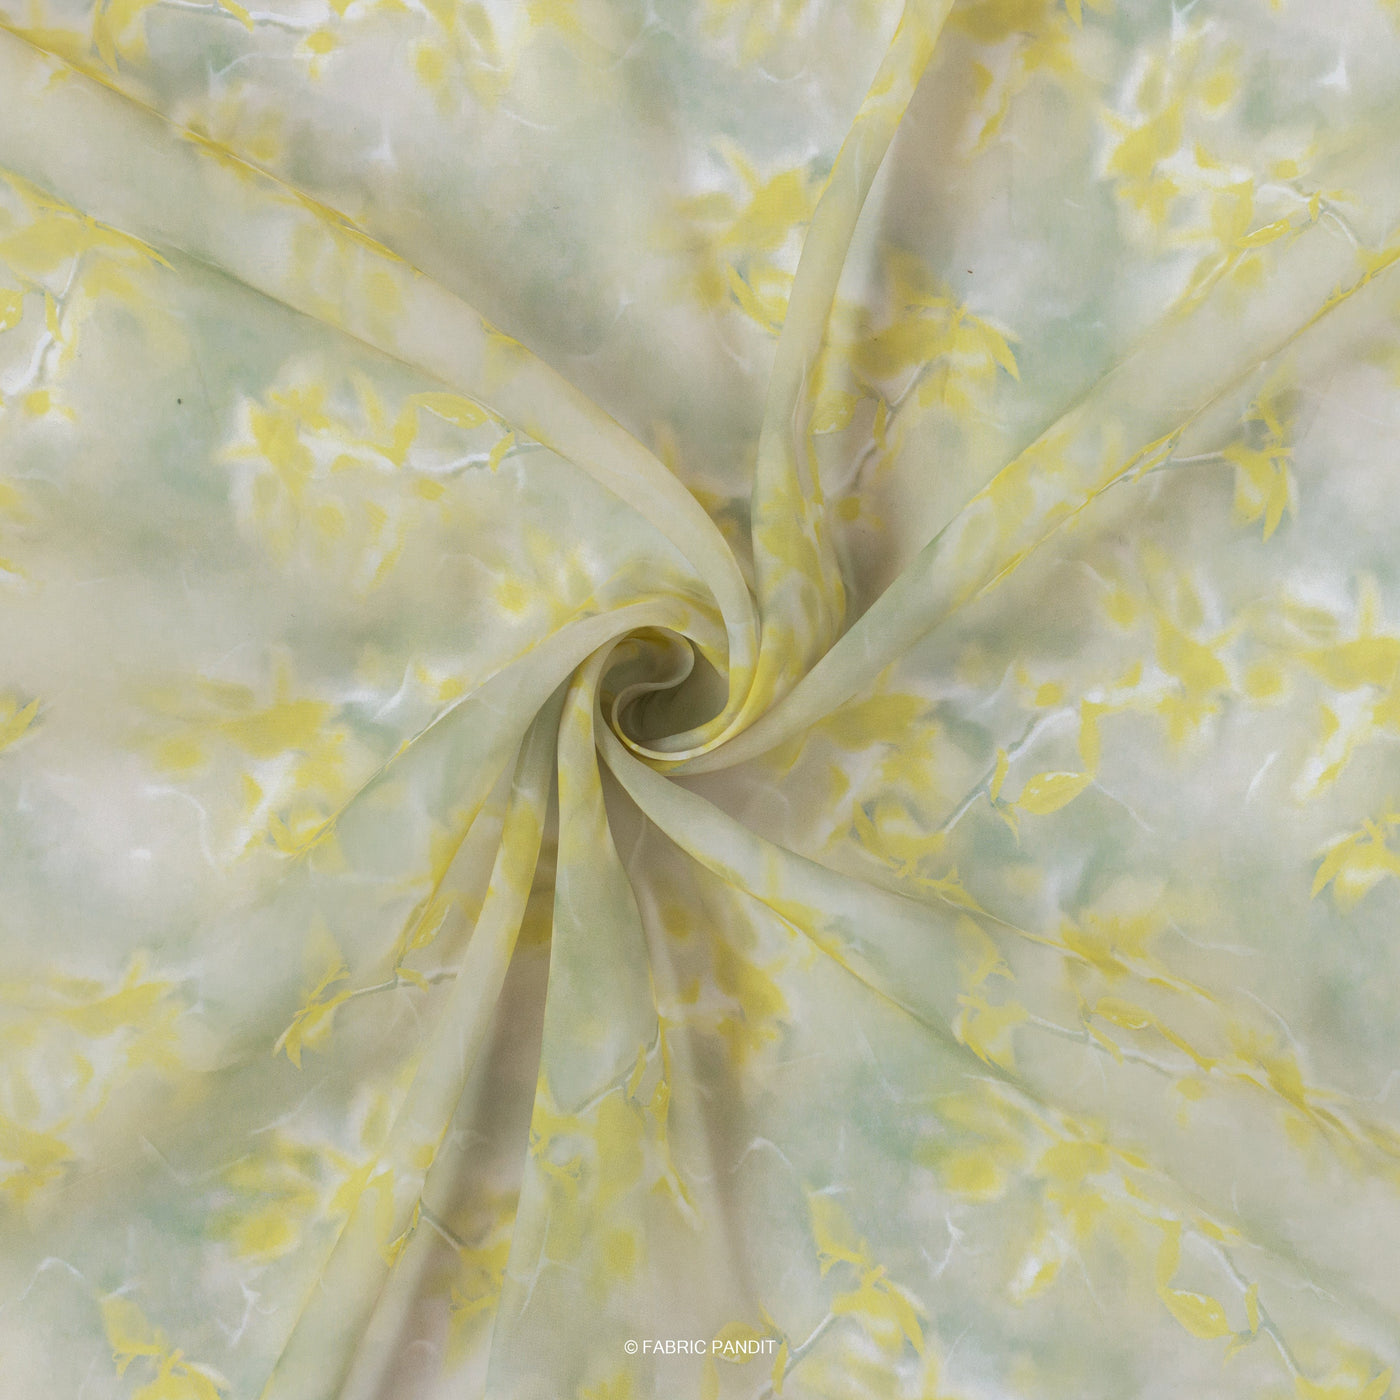 Fabric Pandit Fabric Dusty Green & Yellow Floral Pattern Digital Printed Organza Fabric (Width 42 Inches)